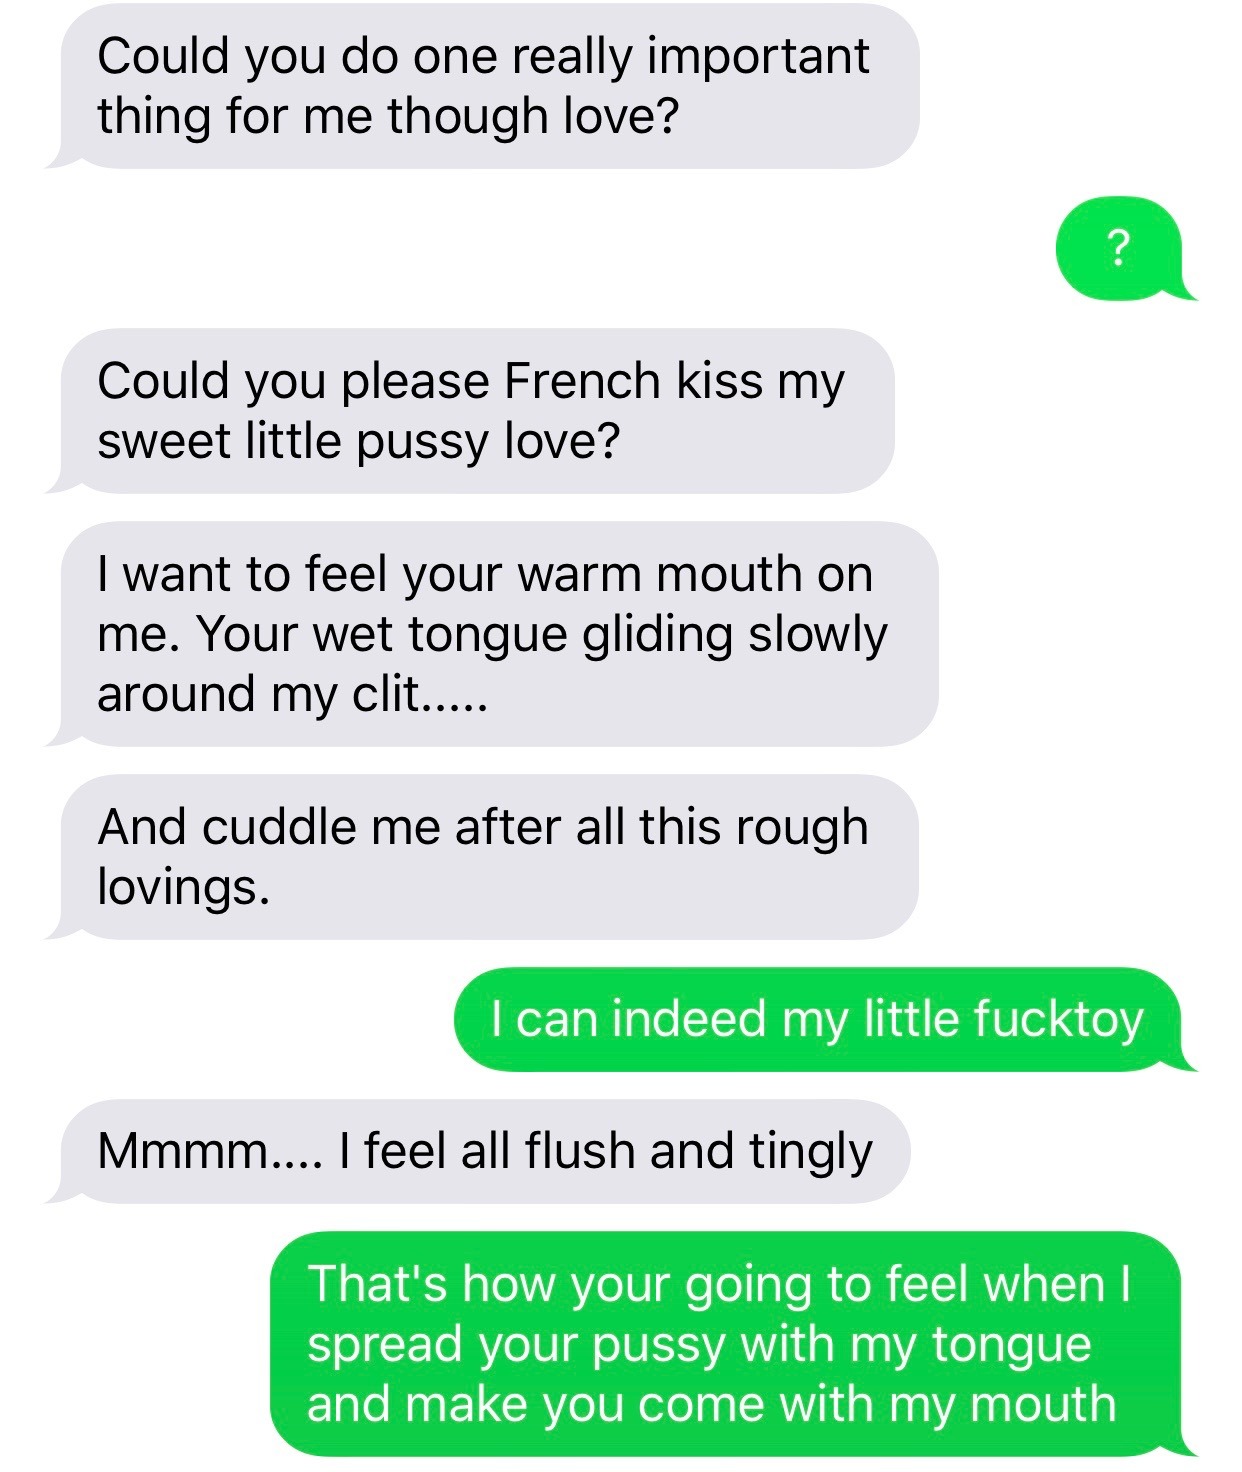 46 Women Reveal the Best and Hottest Sexts They’ve Ever Received